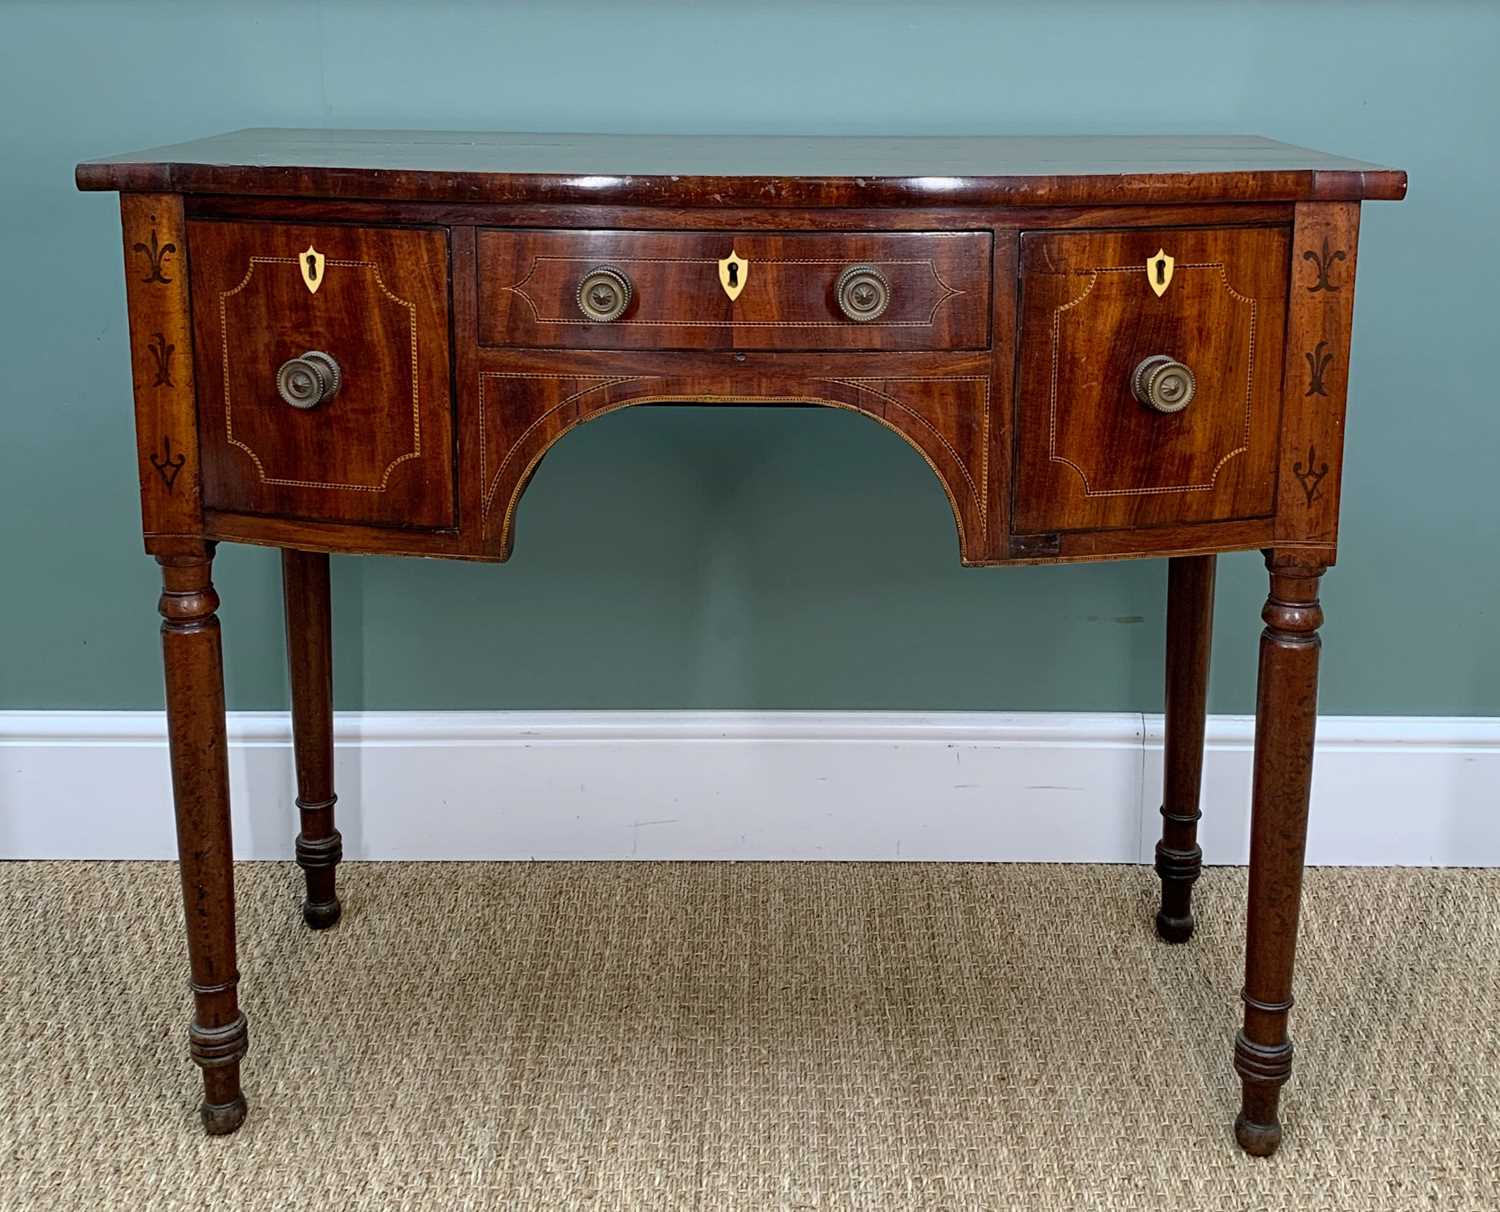 EARLY 19TH CENTURY MAHOGANY BOWFRONT SIDEBOARD, with chequer strung drawer fronts and under arch,